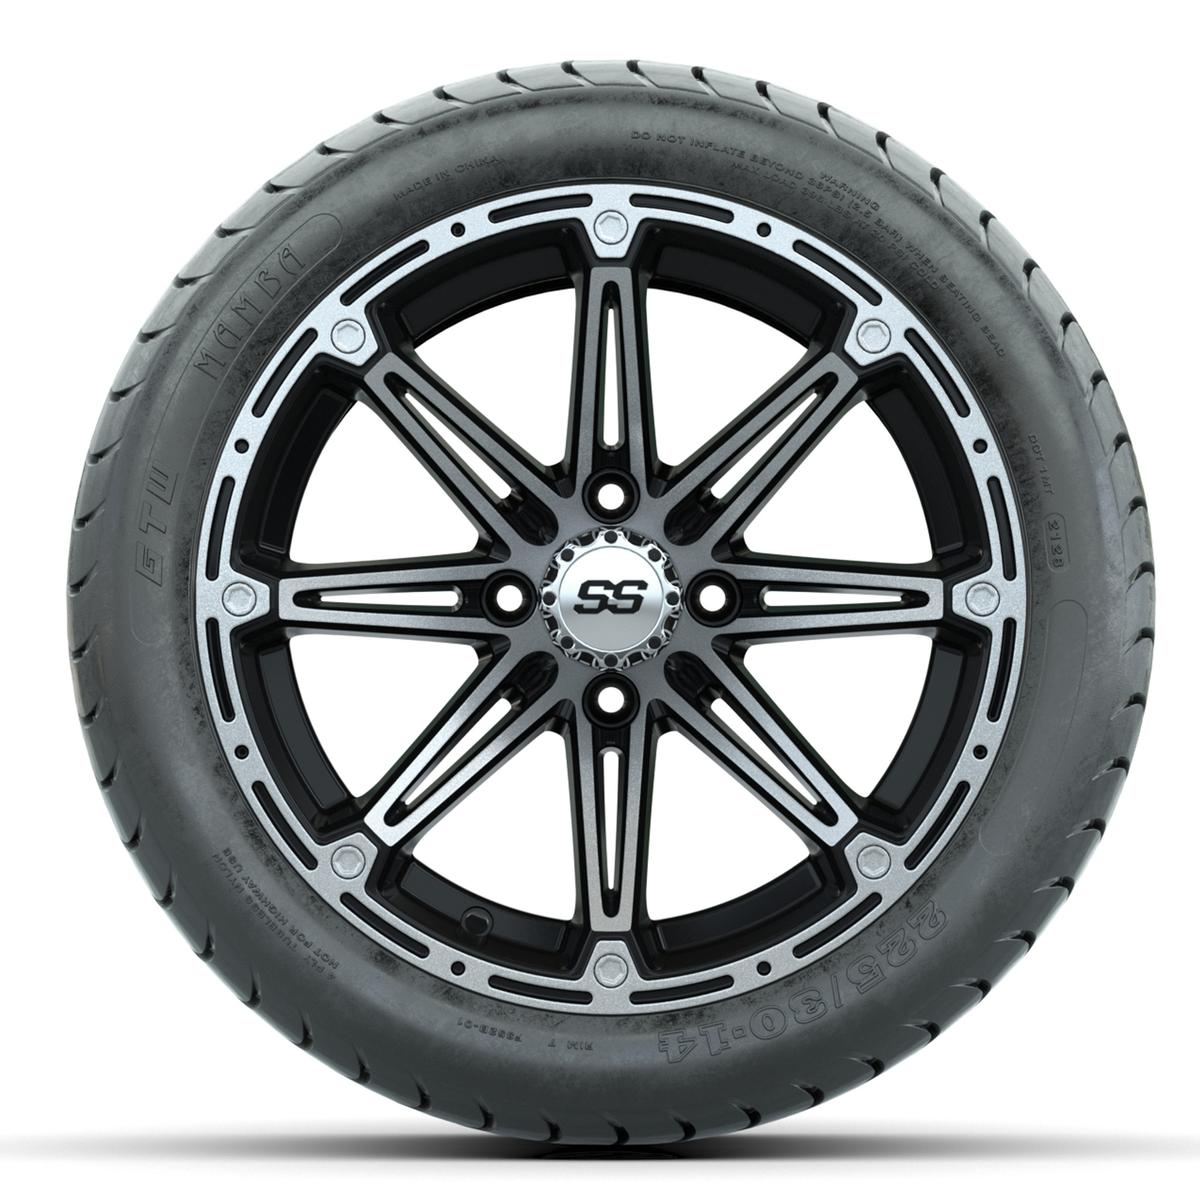 Set of (4) 14 in GTW Element Wheels with 225/30-14 Mamba Street Tires